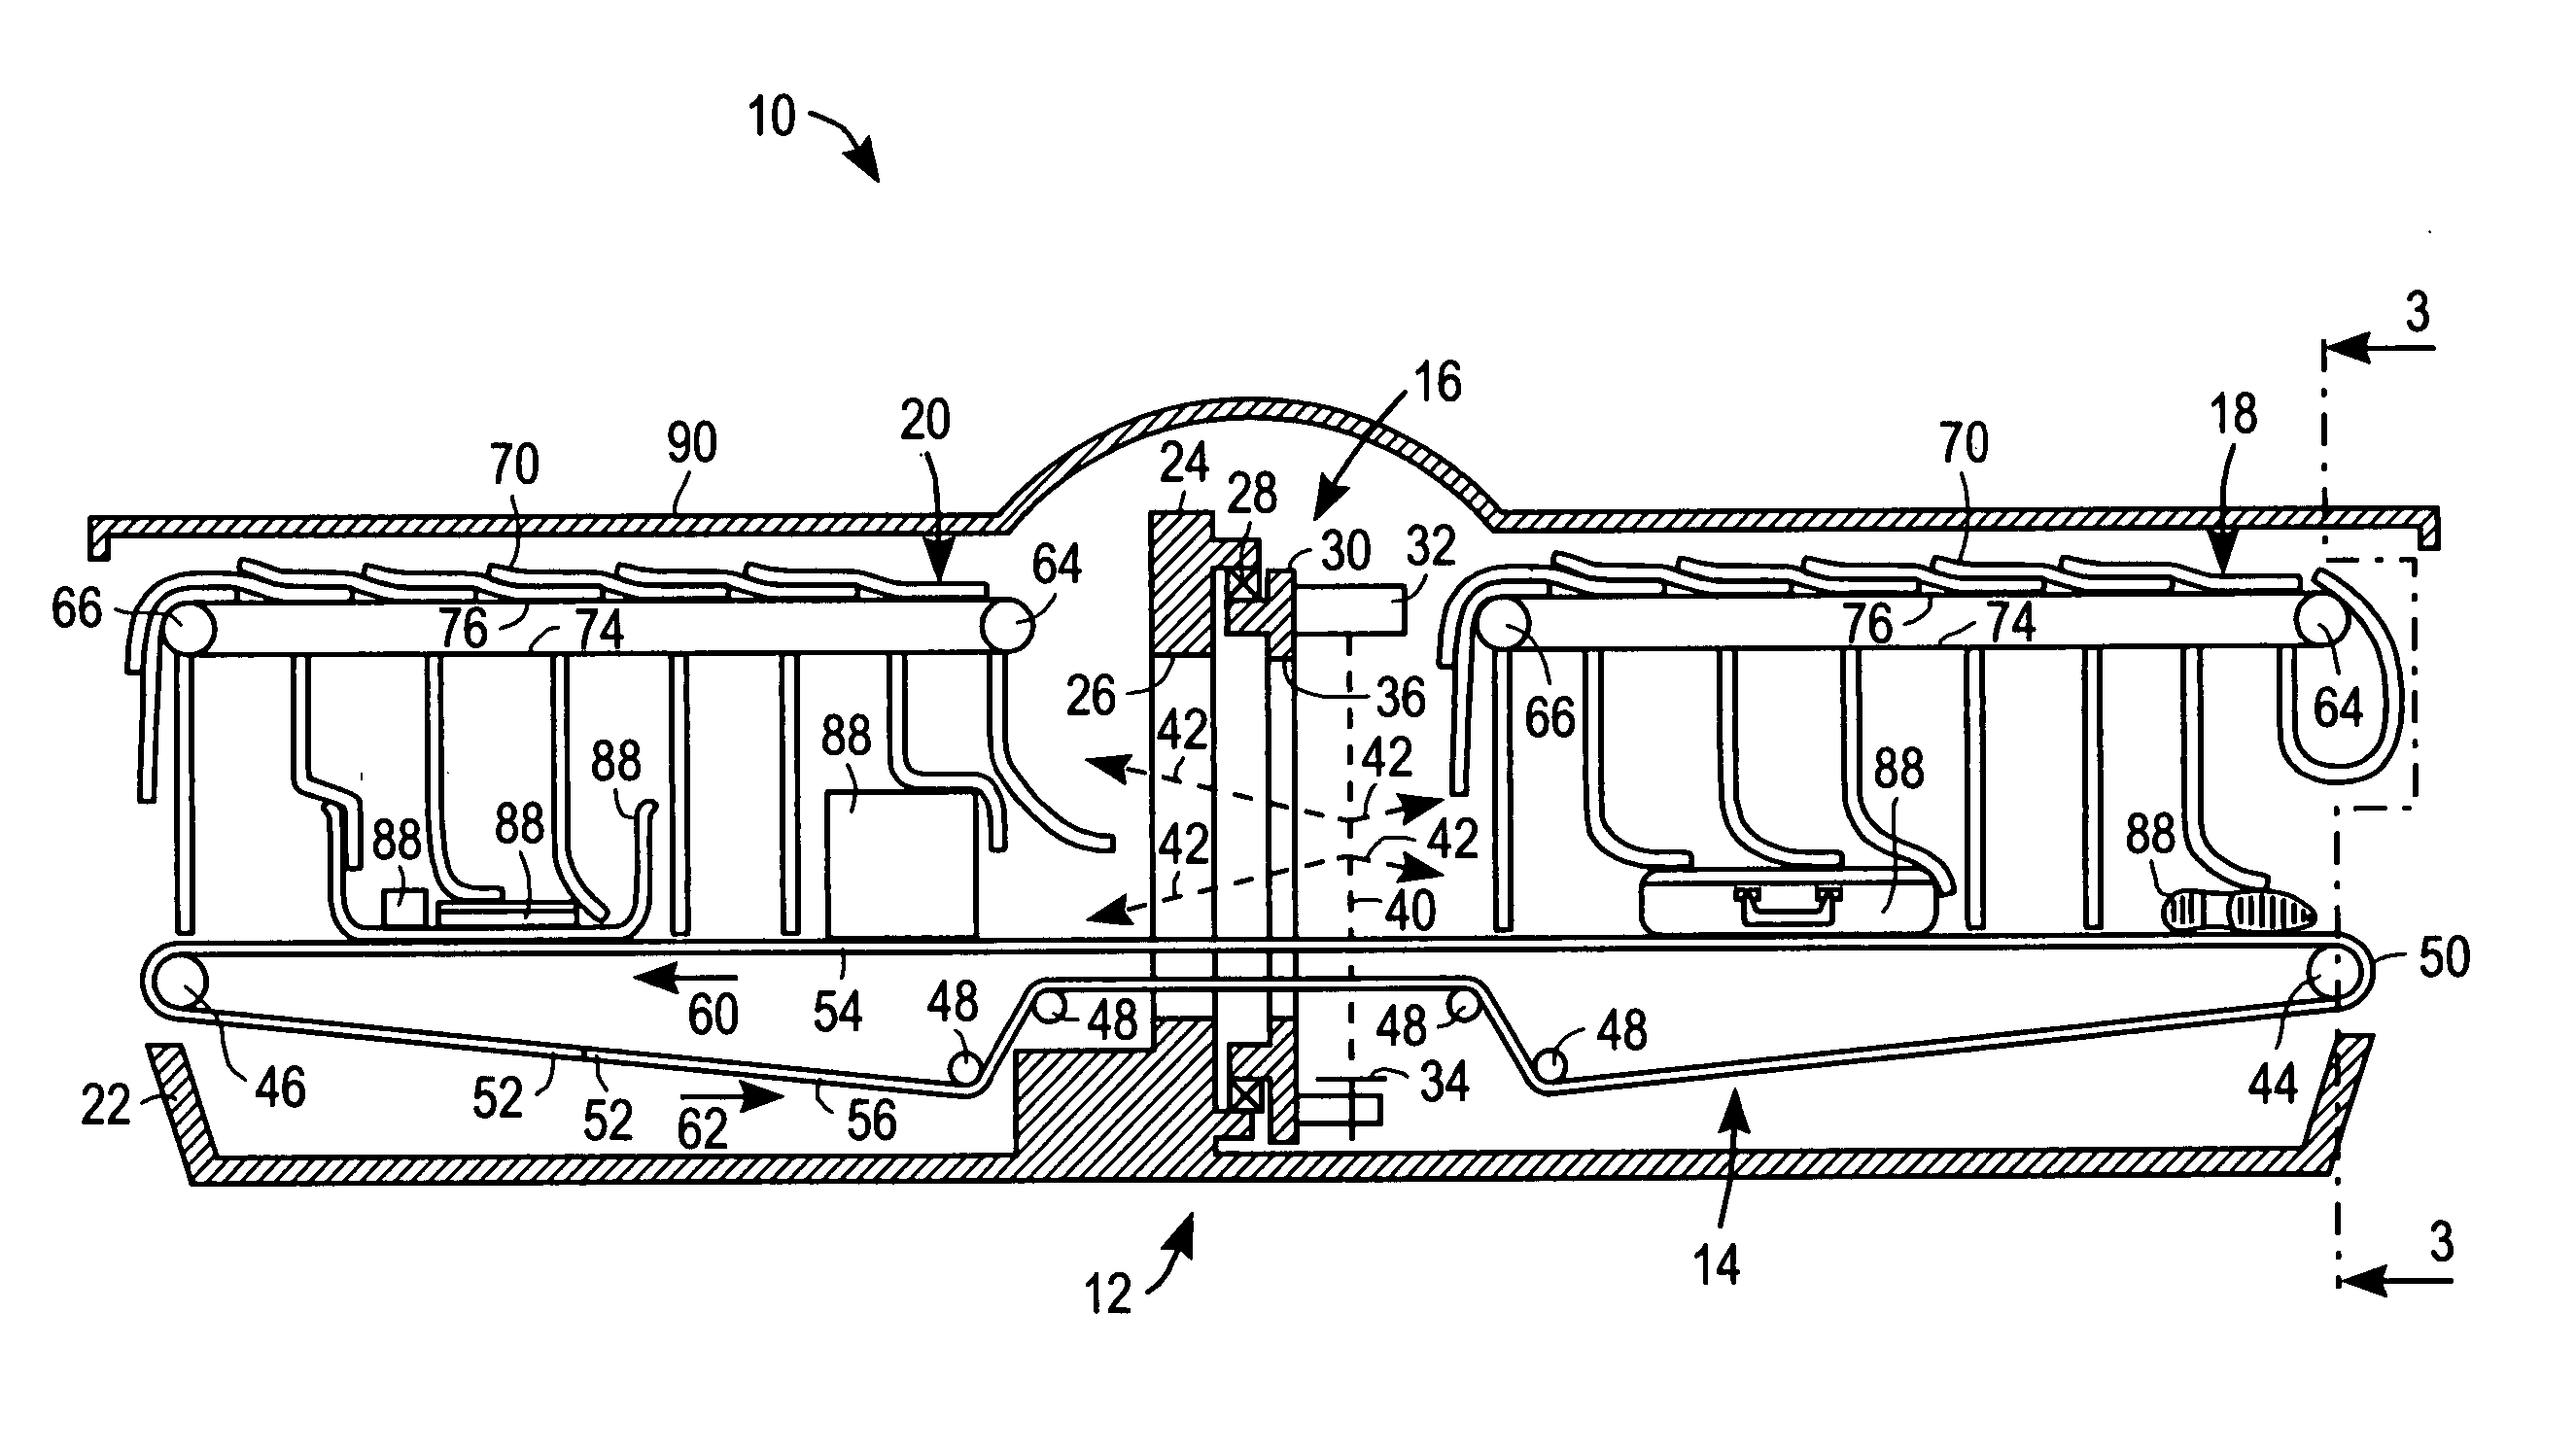 Apparatus and method for nonintrusively inspecting an object